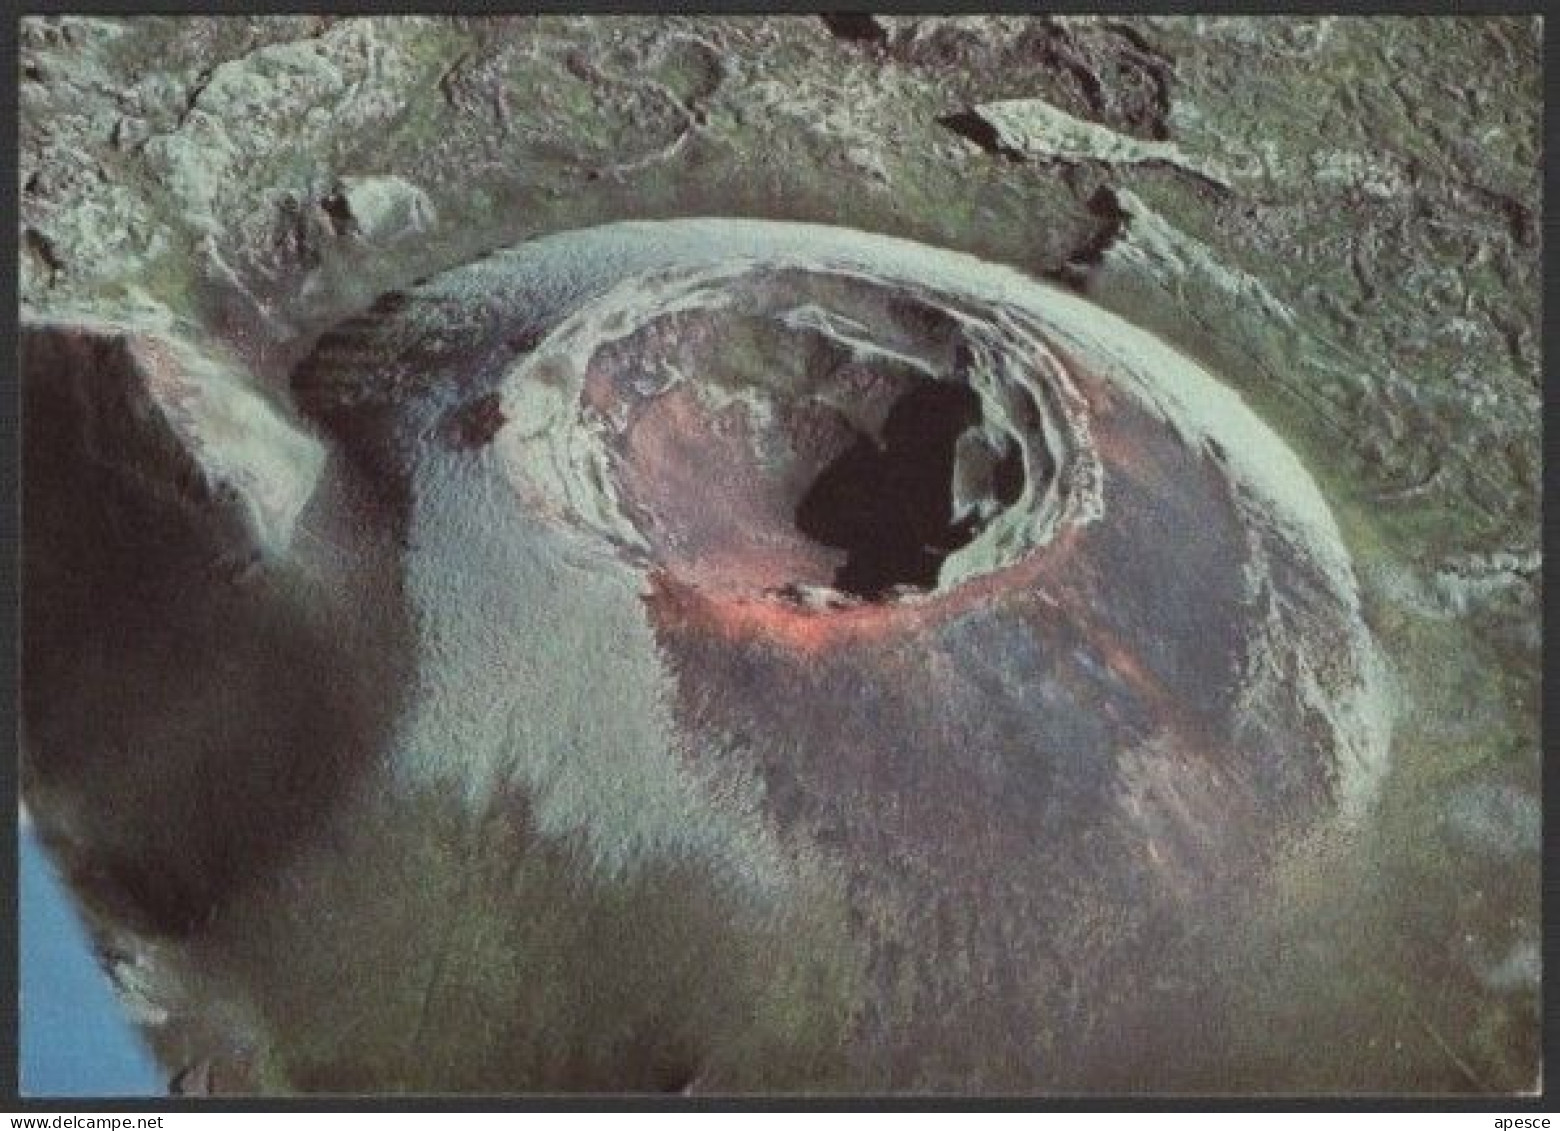 ICELAND - ONE OF THE 115 CRATERS OF THE INFAMOUS LAKI FISSURE ERUPTION 1783 - MINT - I - Islande